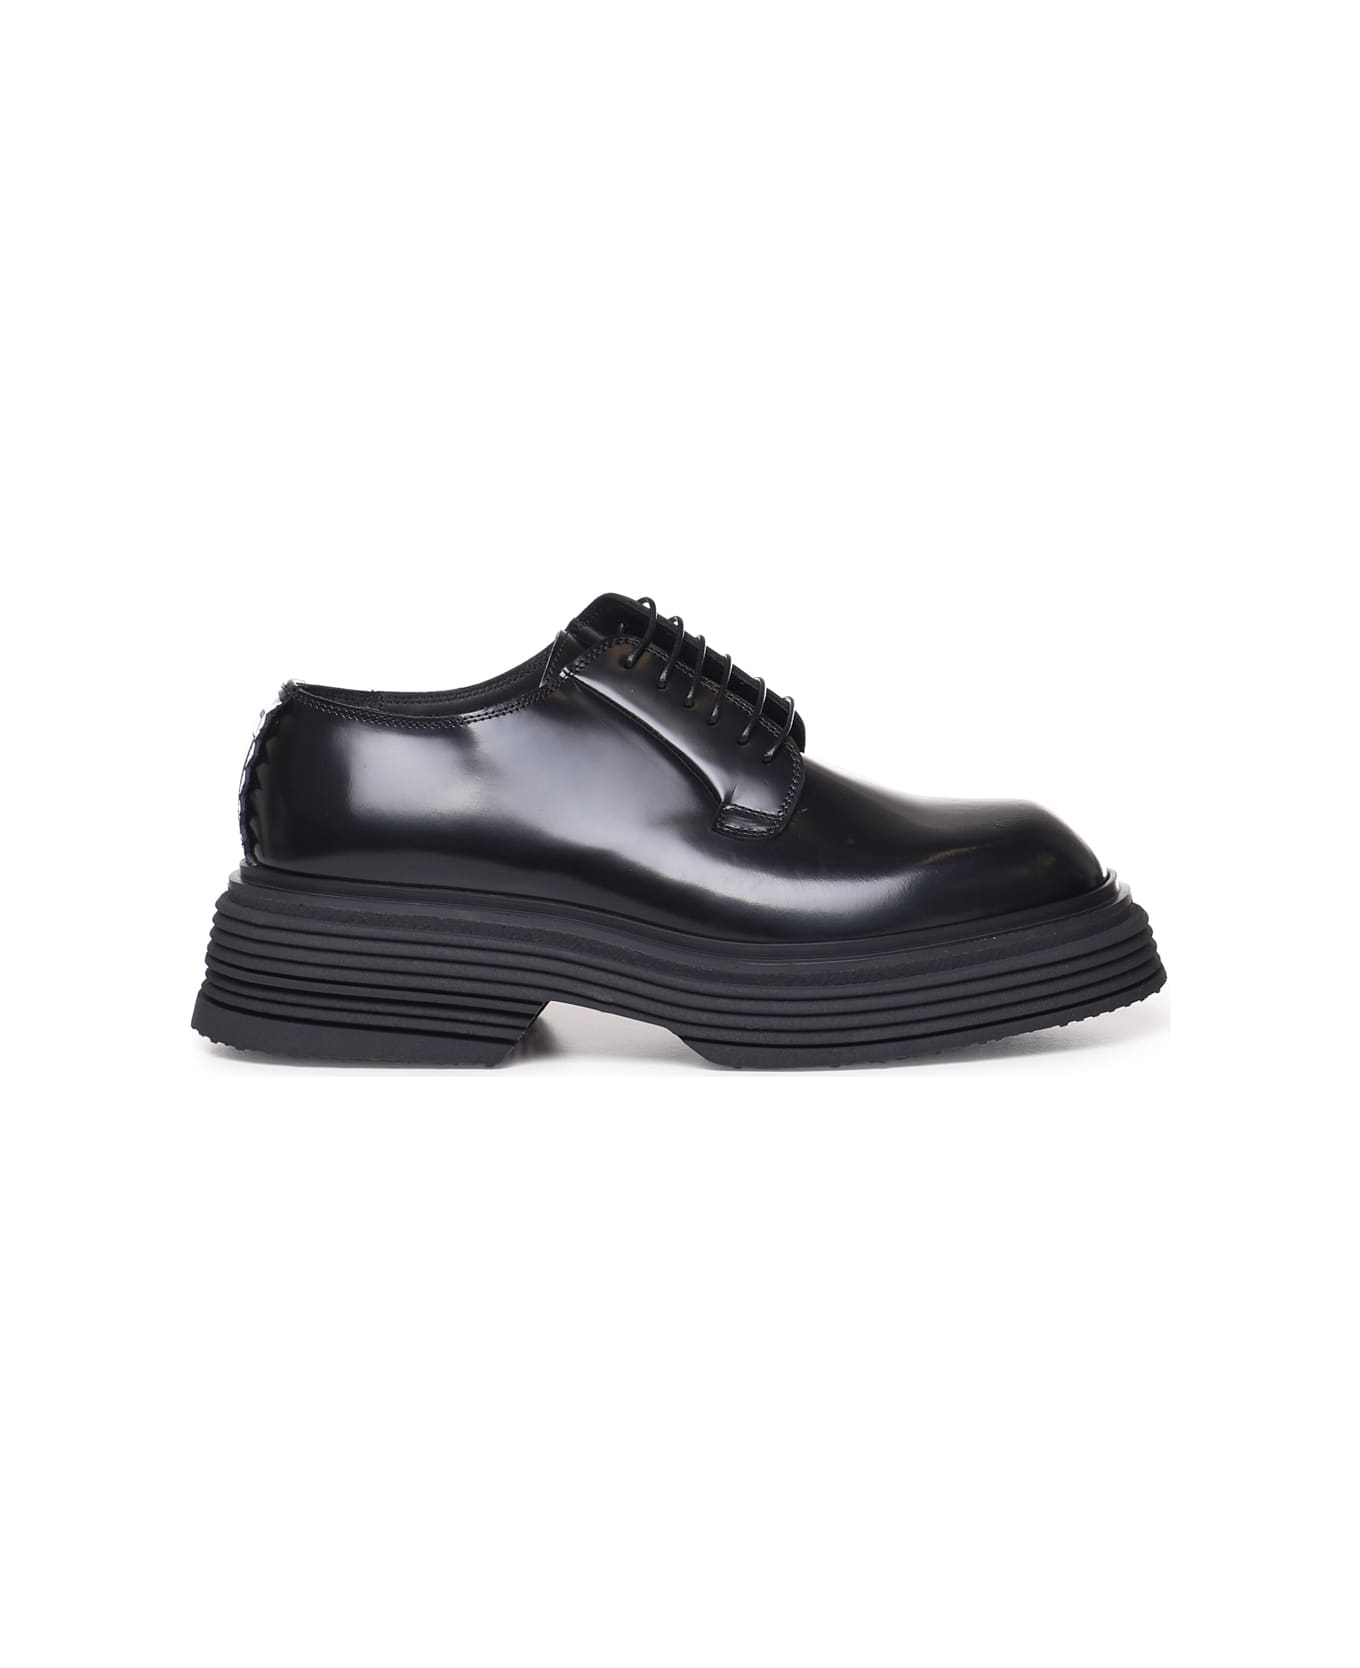 The Antipode Oxford Style Lace-up Shoes - Black